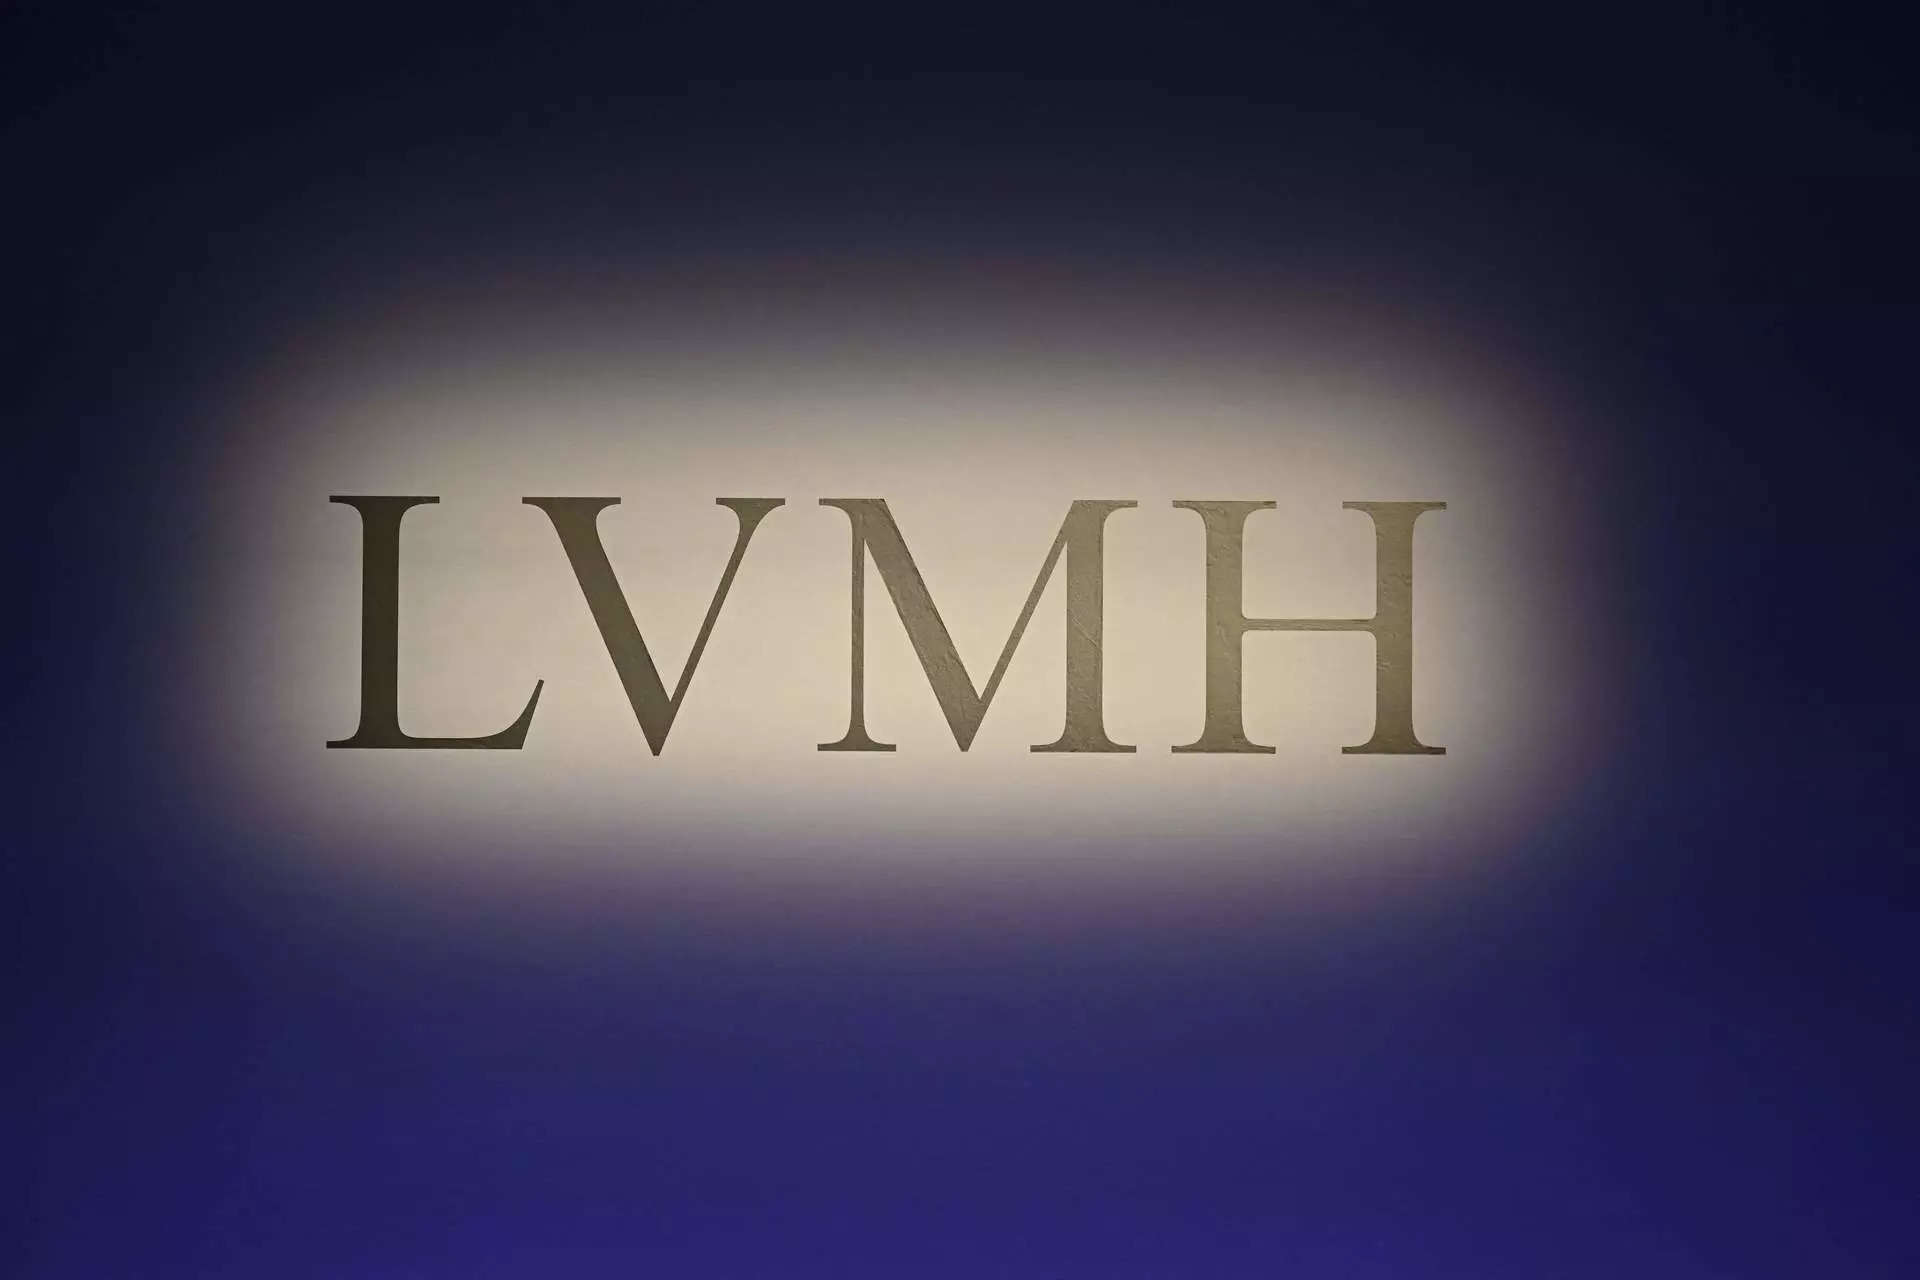 LVMH Acquires French Jewelry Manufacturing Group To Strengthen